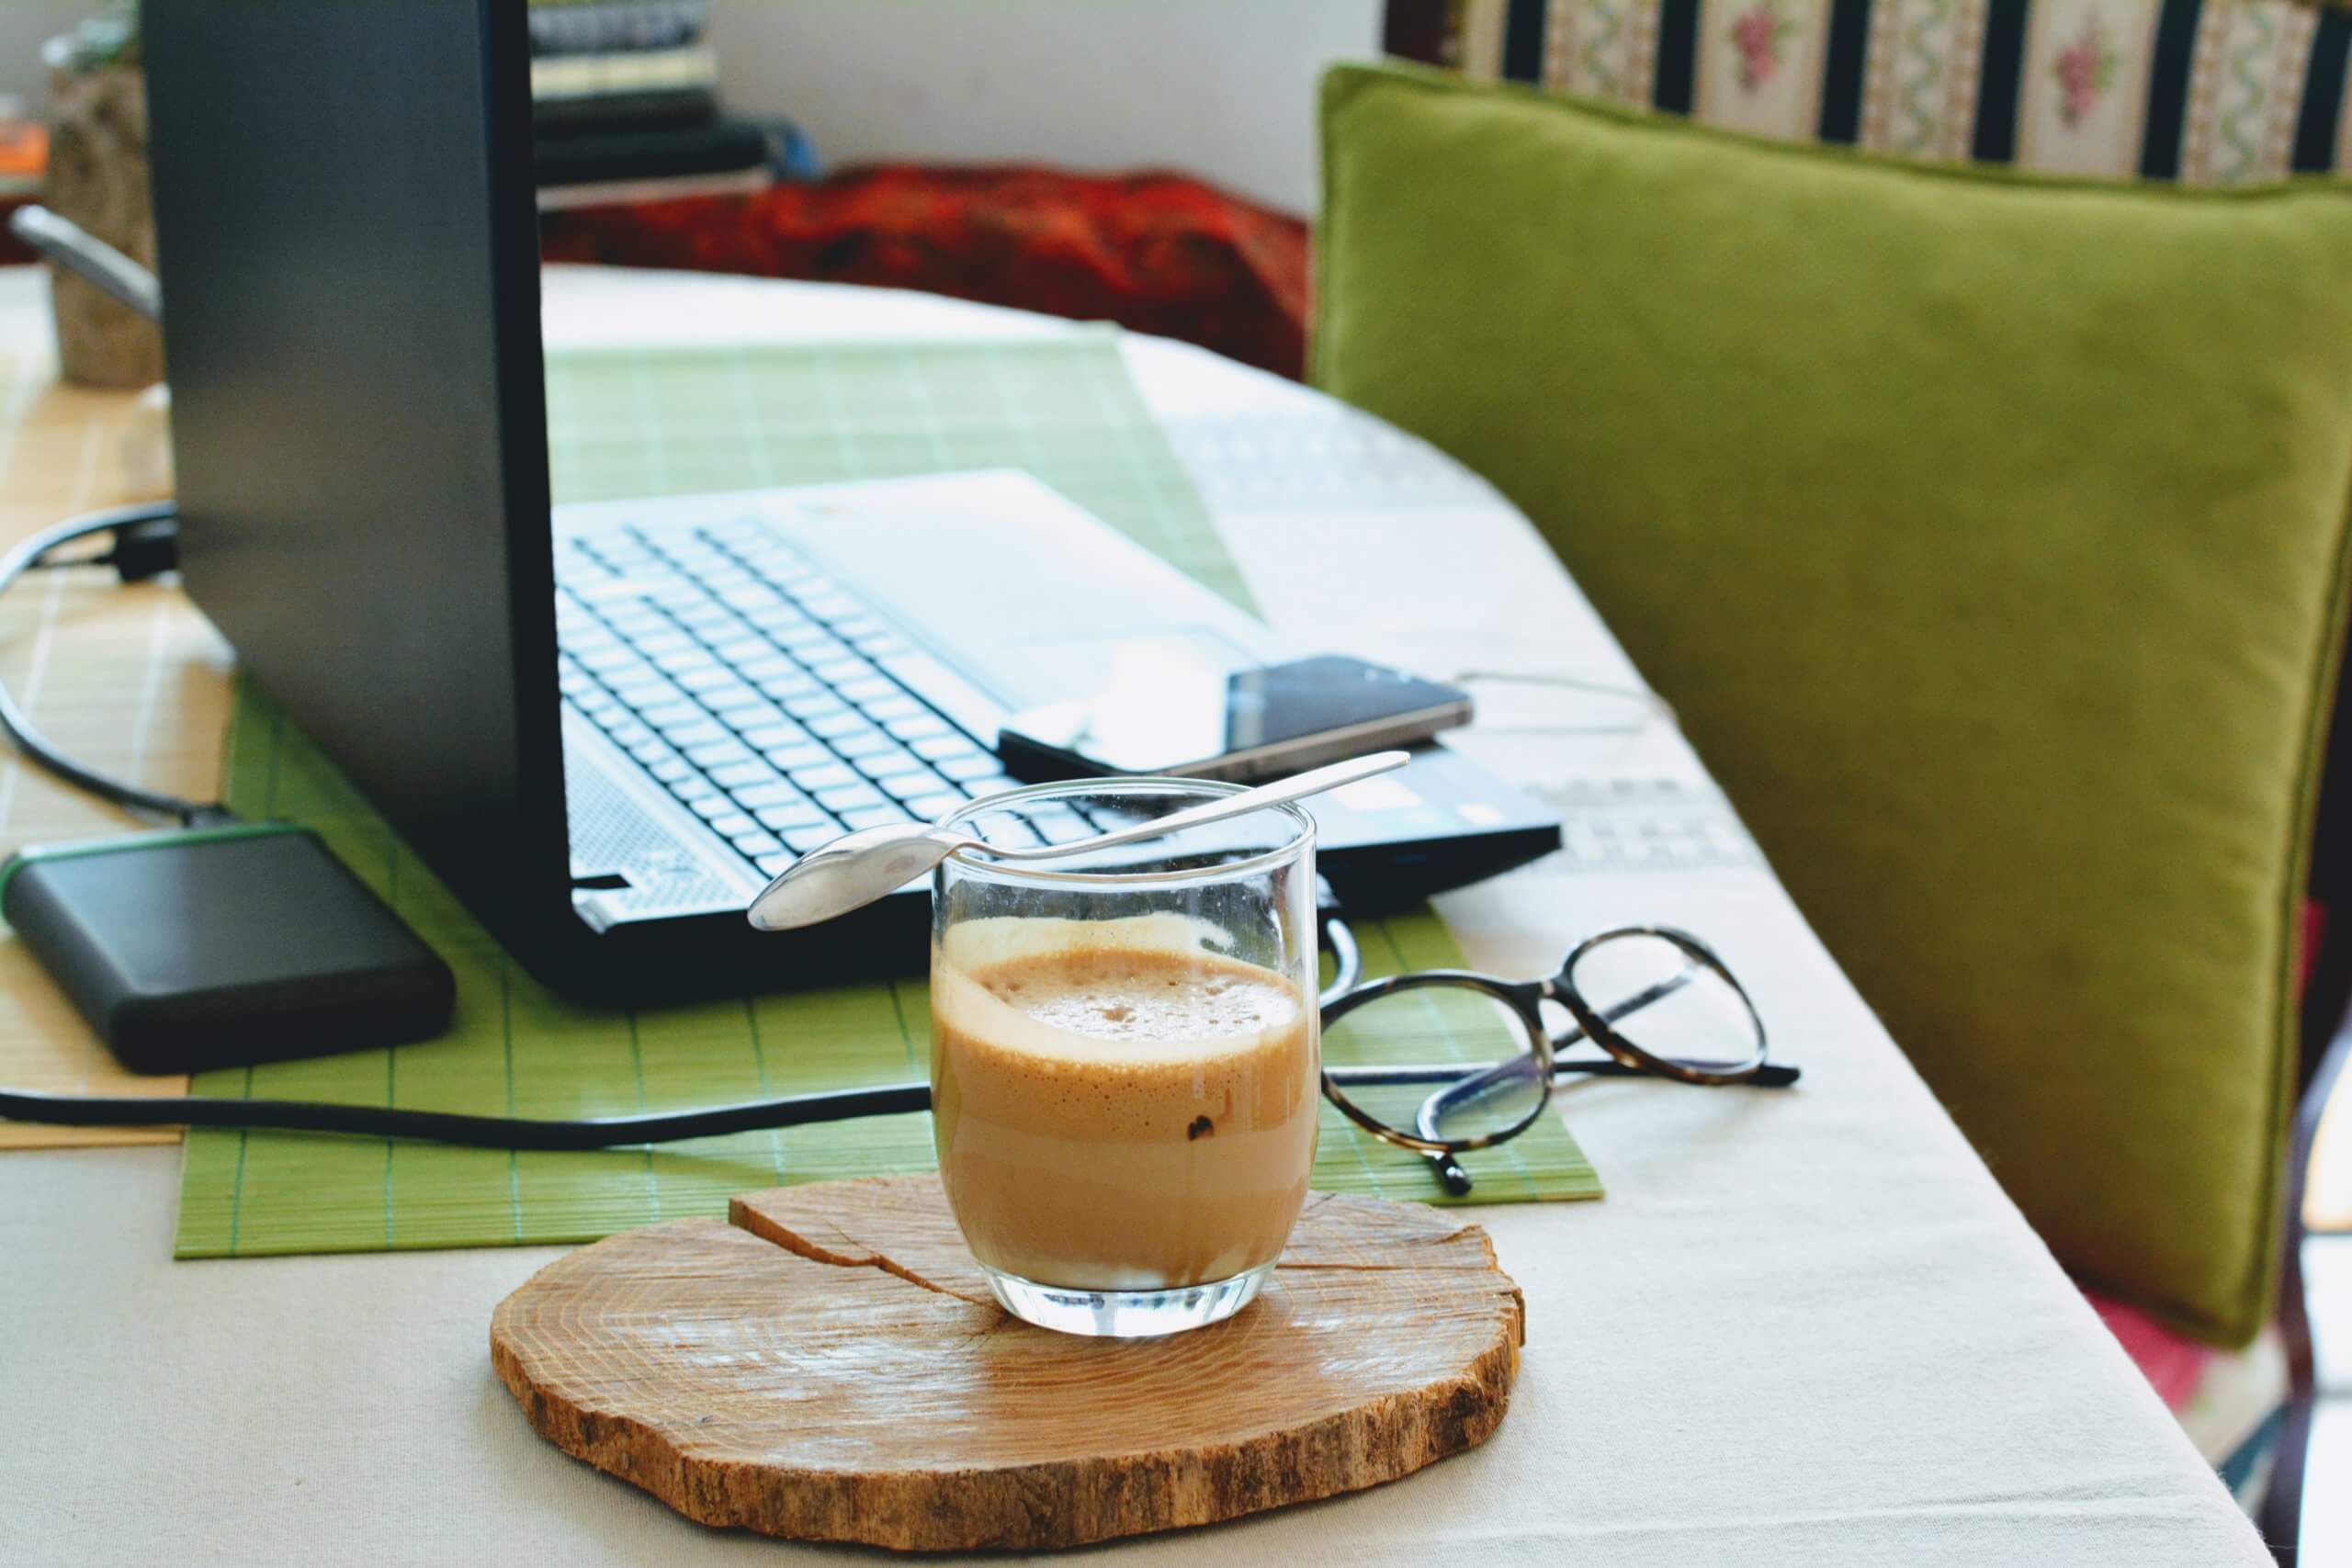 8 Easy & Creative Ways to Keep Remote Employees Engaged